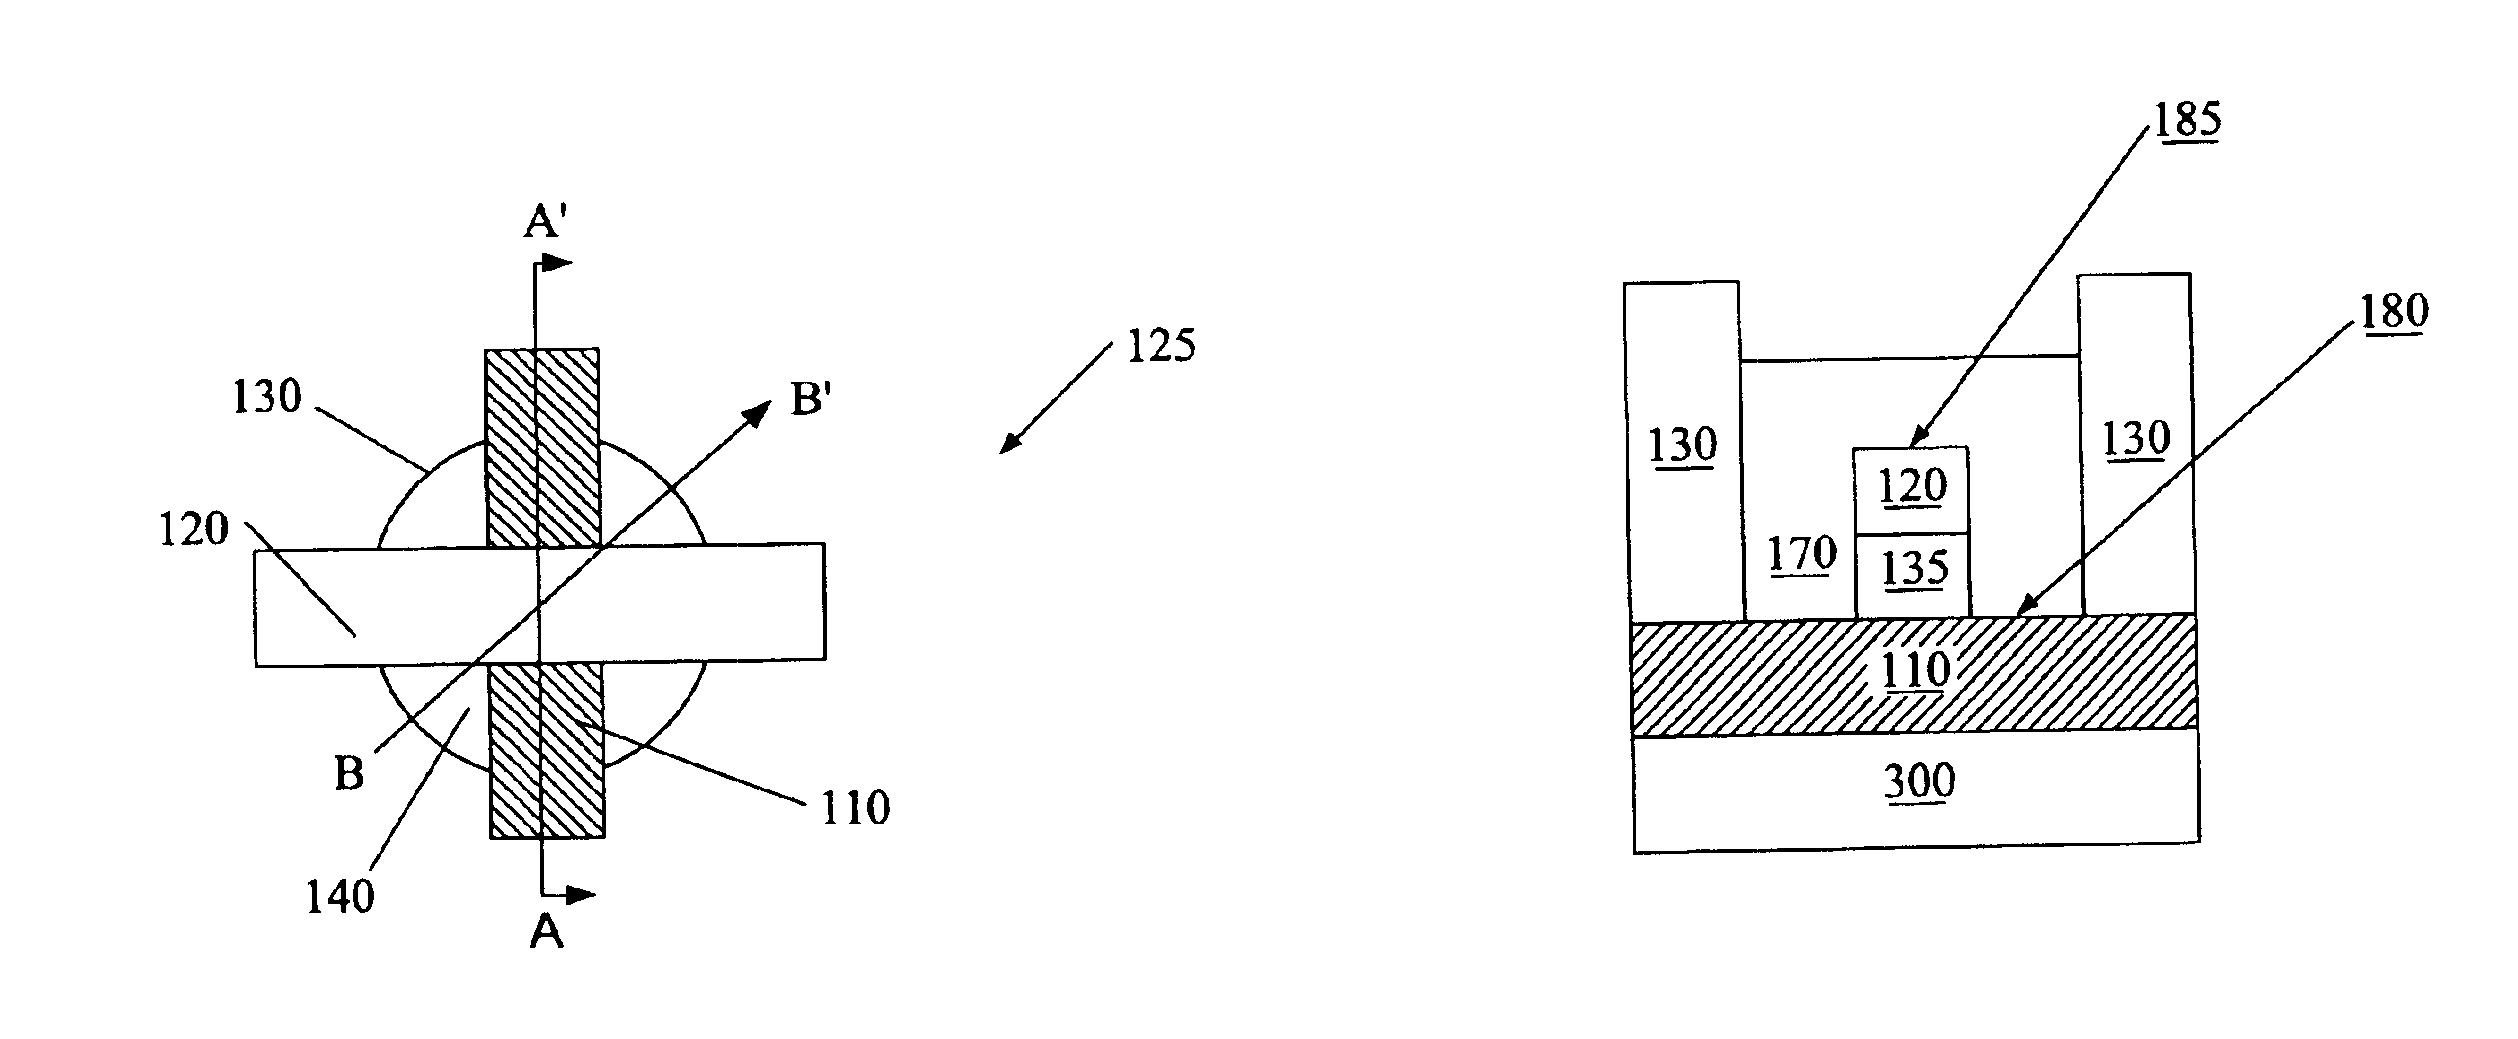 Methods of fabricating crossbar array microelectronic electrochemical cells